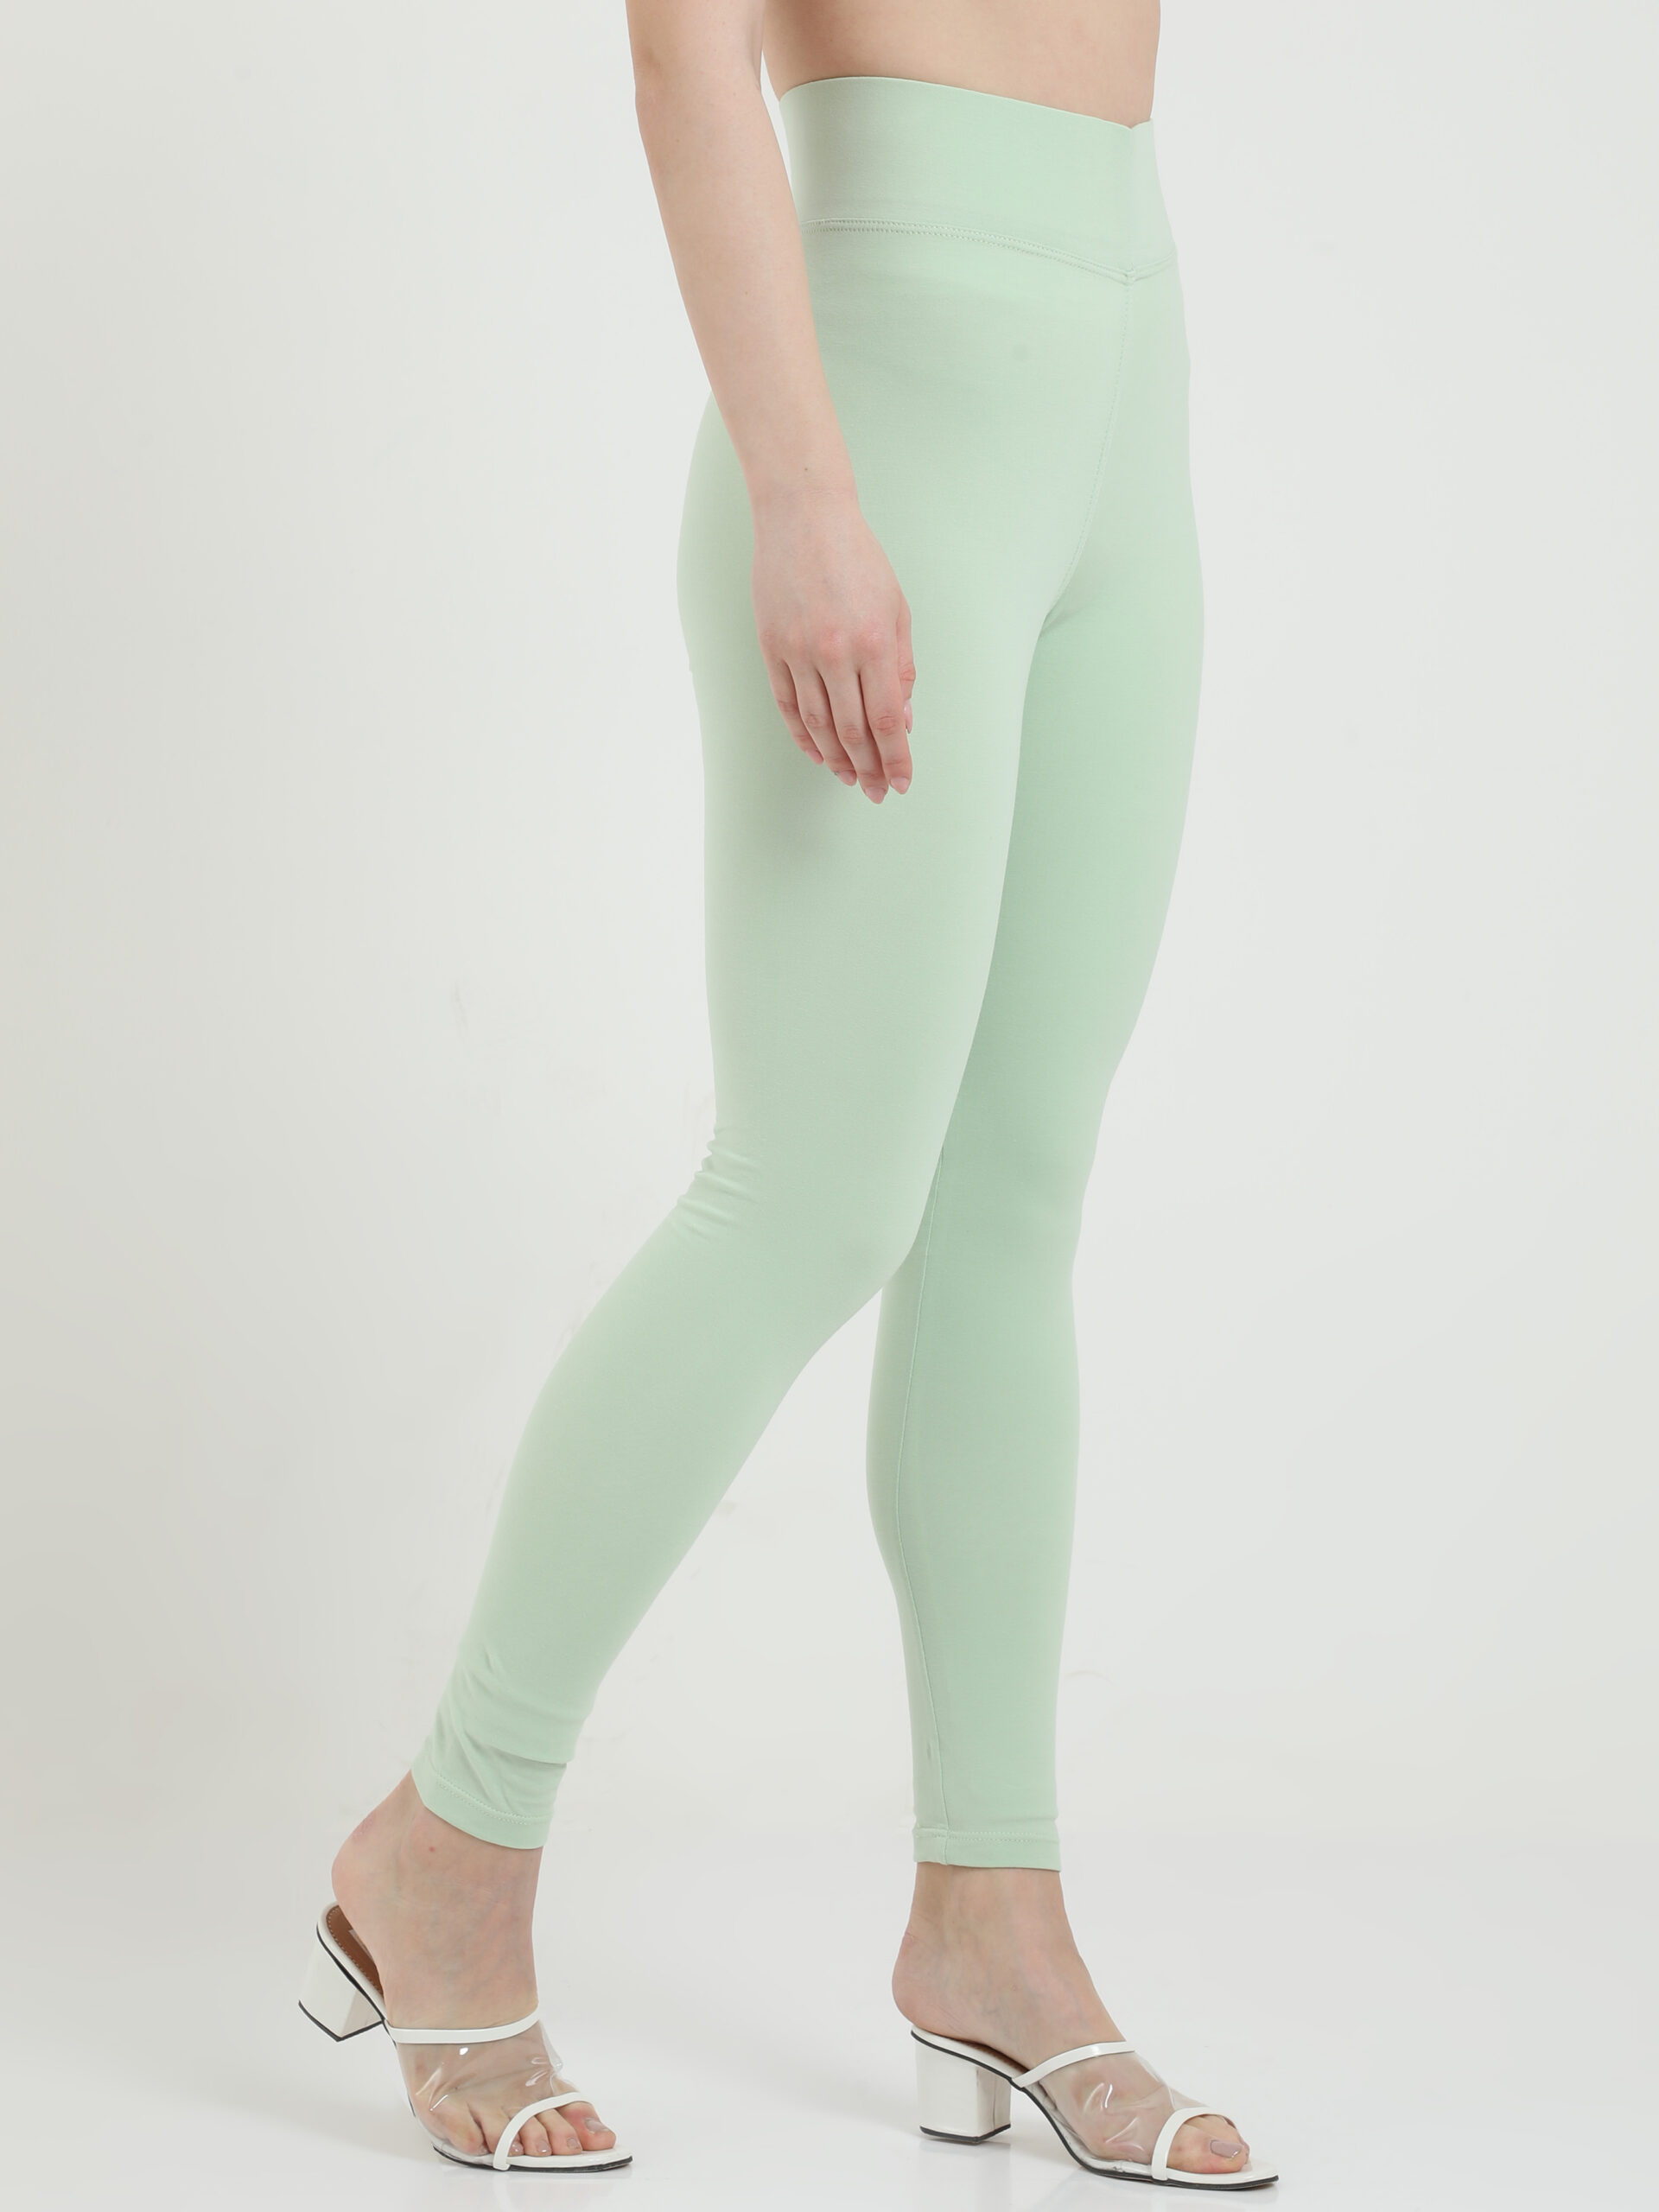 Buy Belore Slims Jeggings for Women Stretchable Ankle Length high